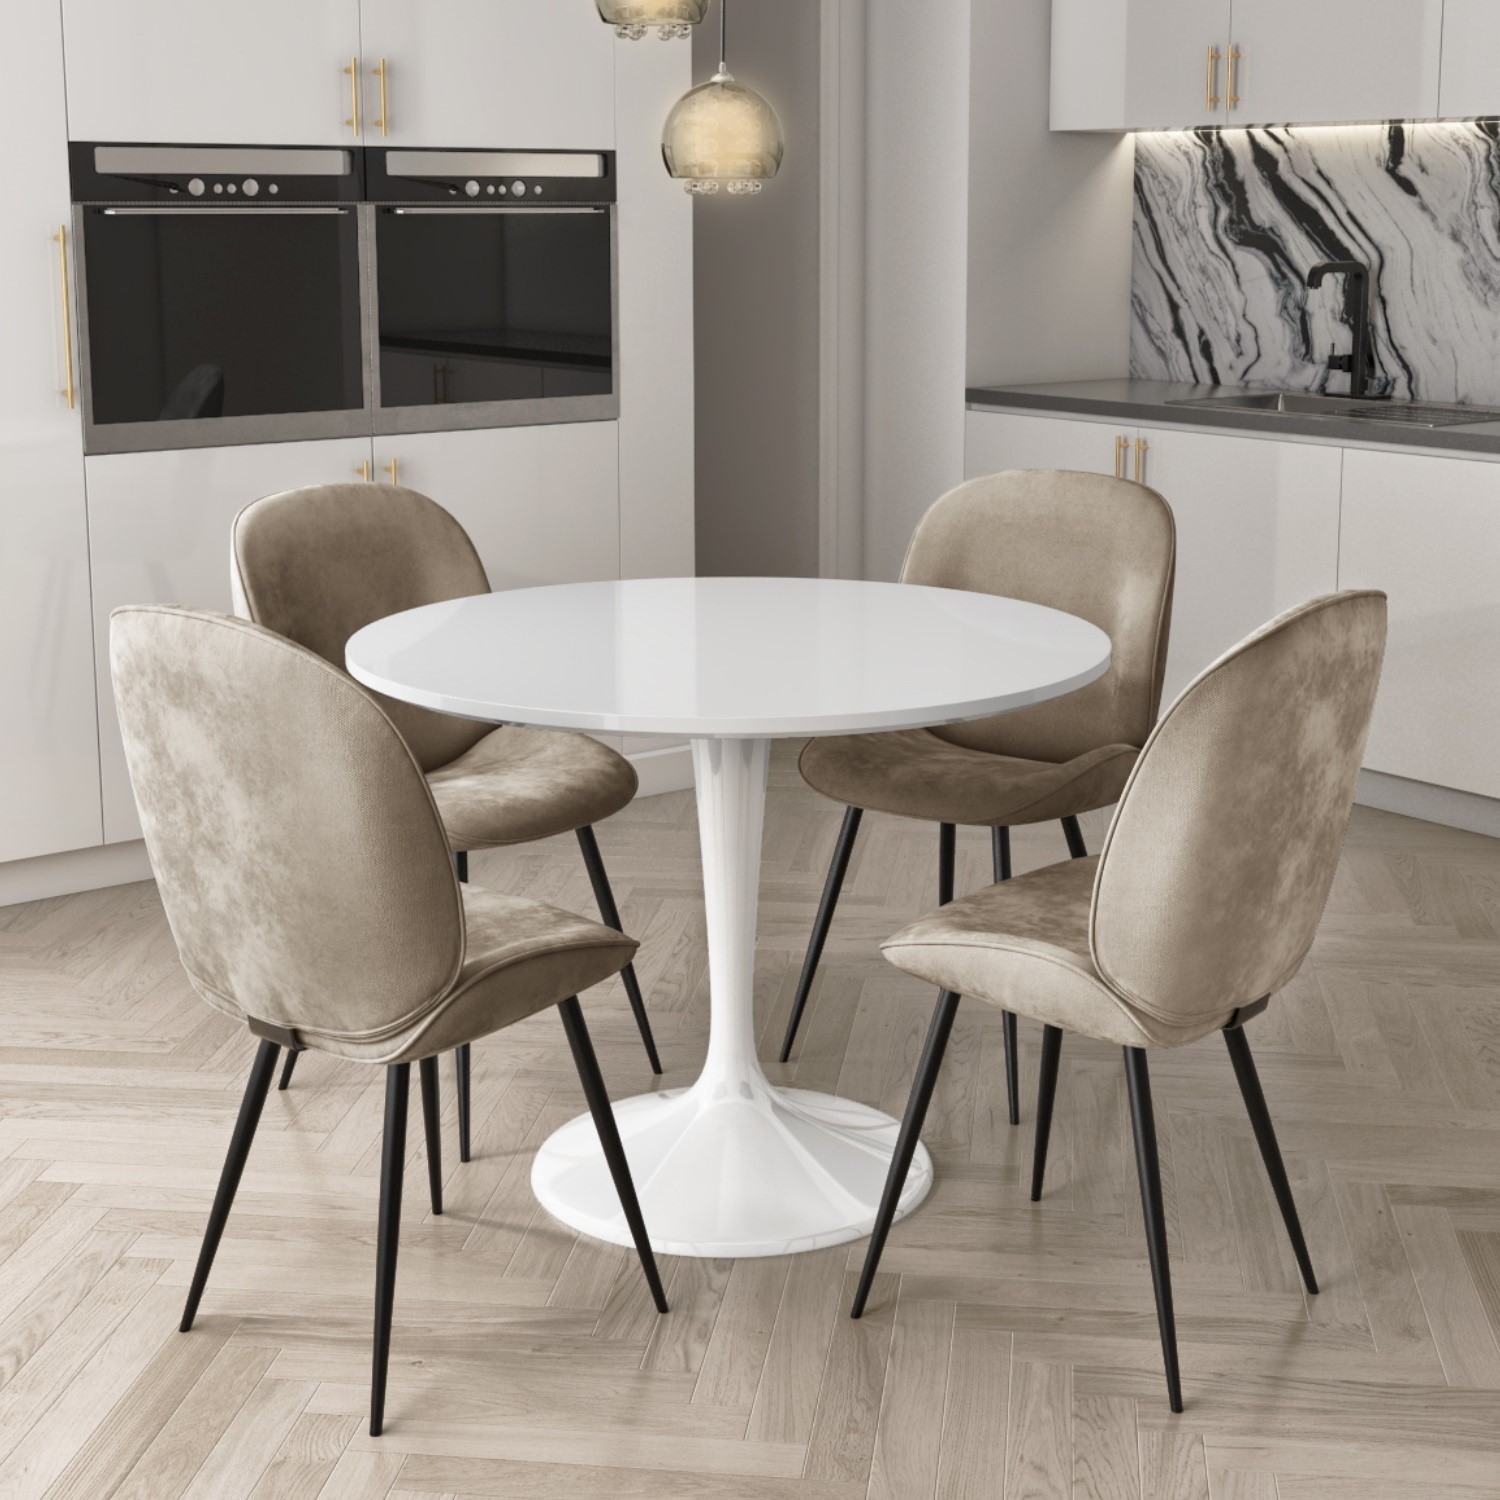 White Round High Gloss Dining Table, White High Gloss Round Dining Table And 4 Chairs